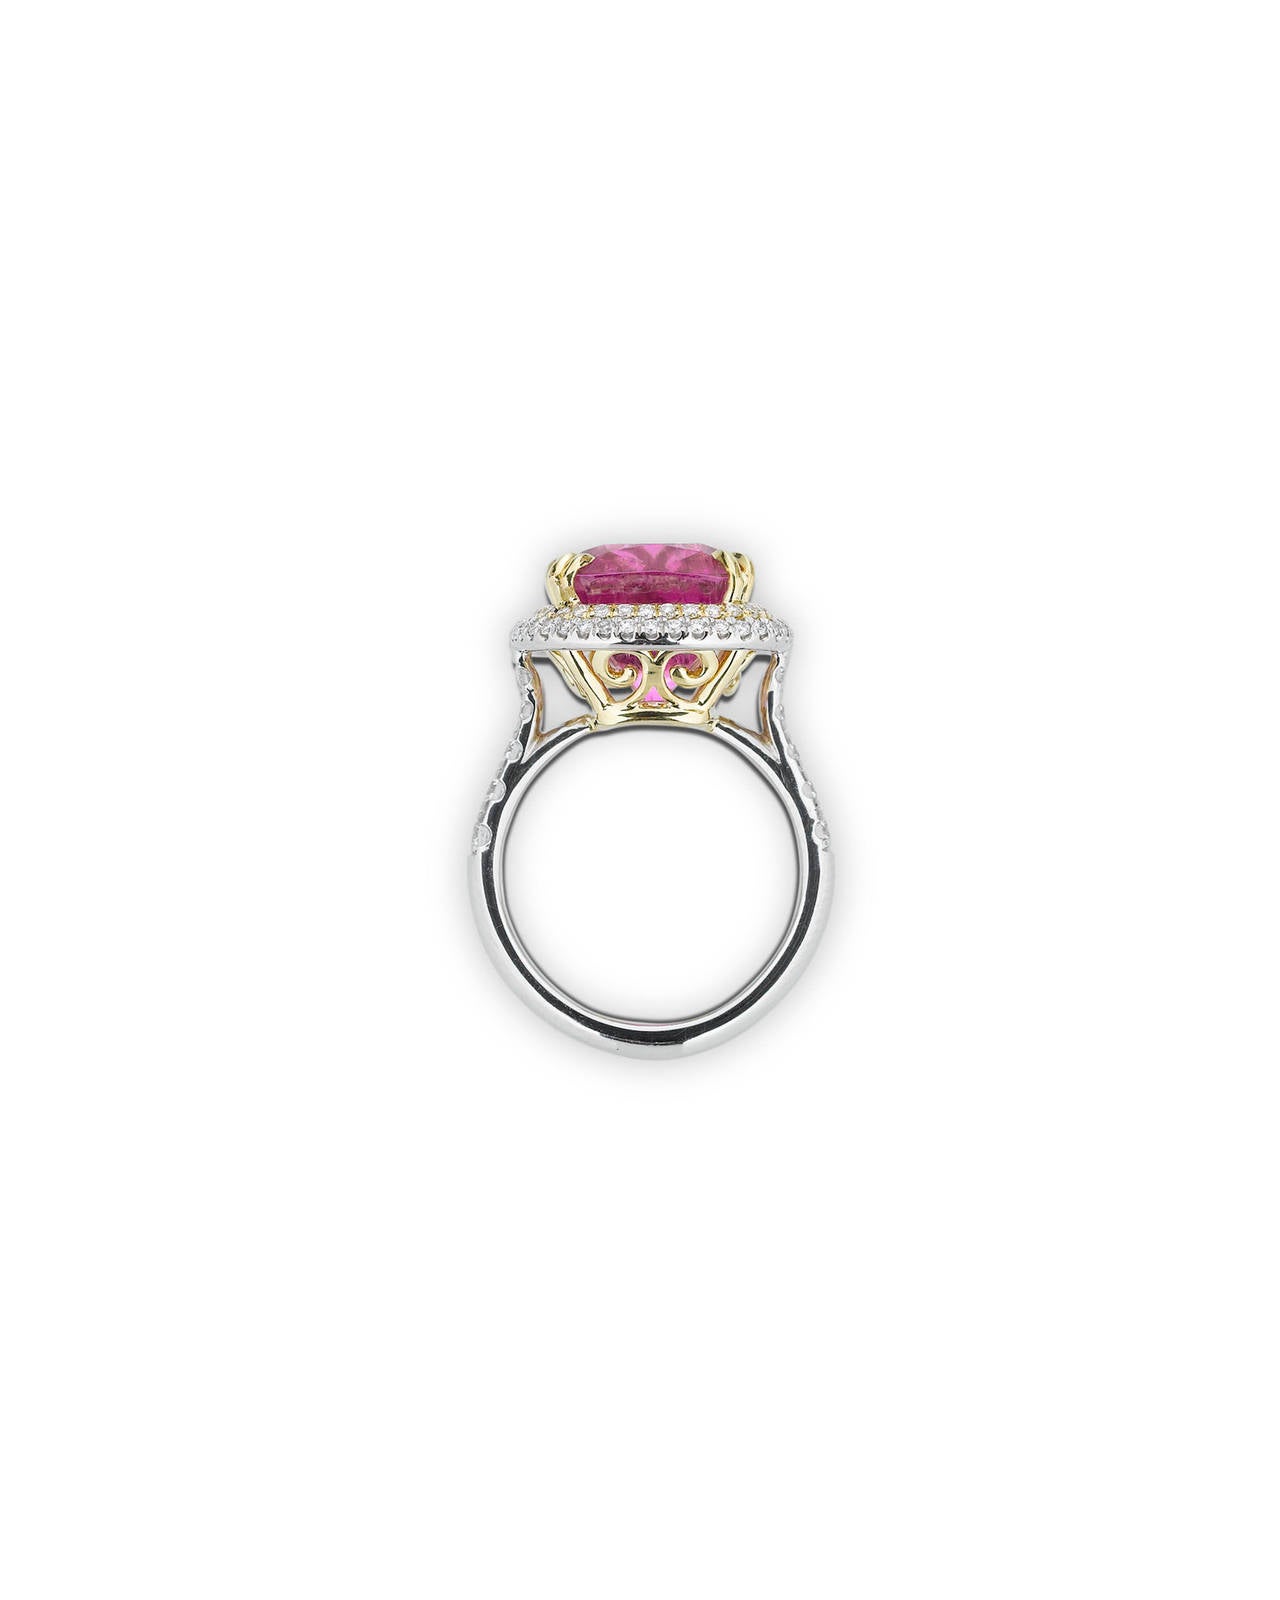 An enchanting Cuprian tourmaline is the star of this exquisite ring. Pink is among the most sought-after hues in which to find this colorful gem, and the distinctive, rosy-pink of this 9.99-carat stone is truly remarkable. Encircled by 0.89 carats